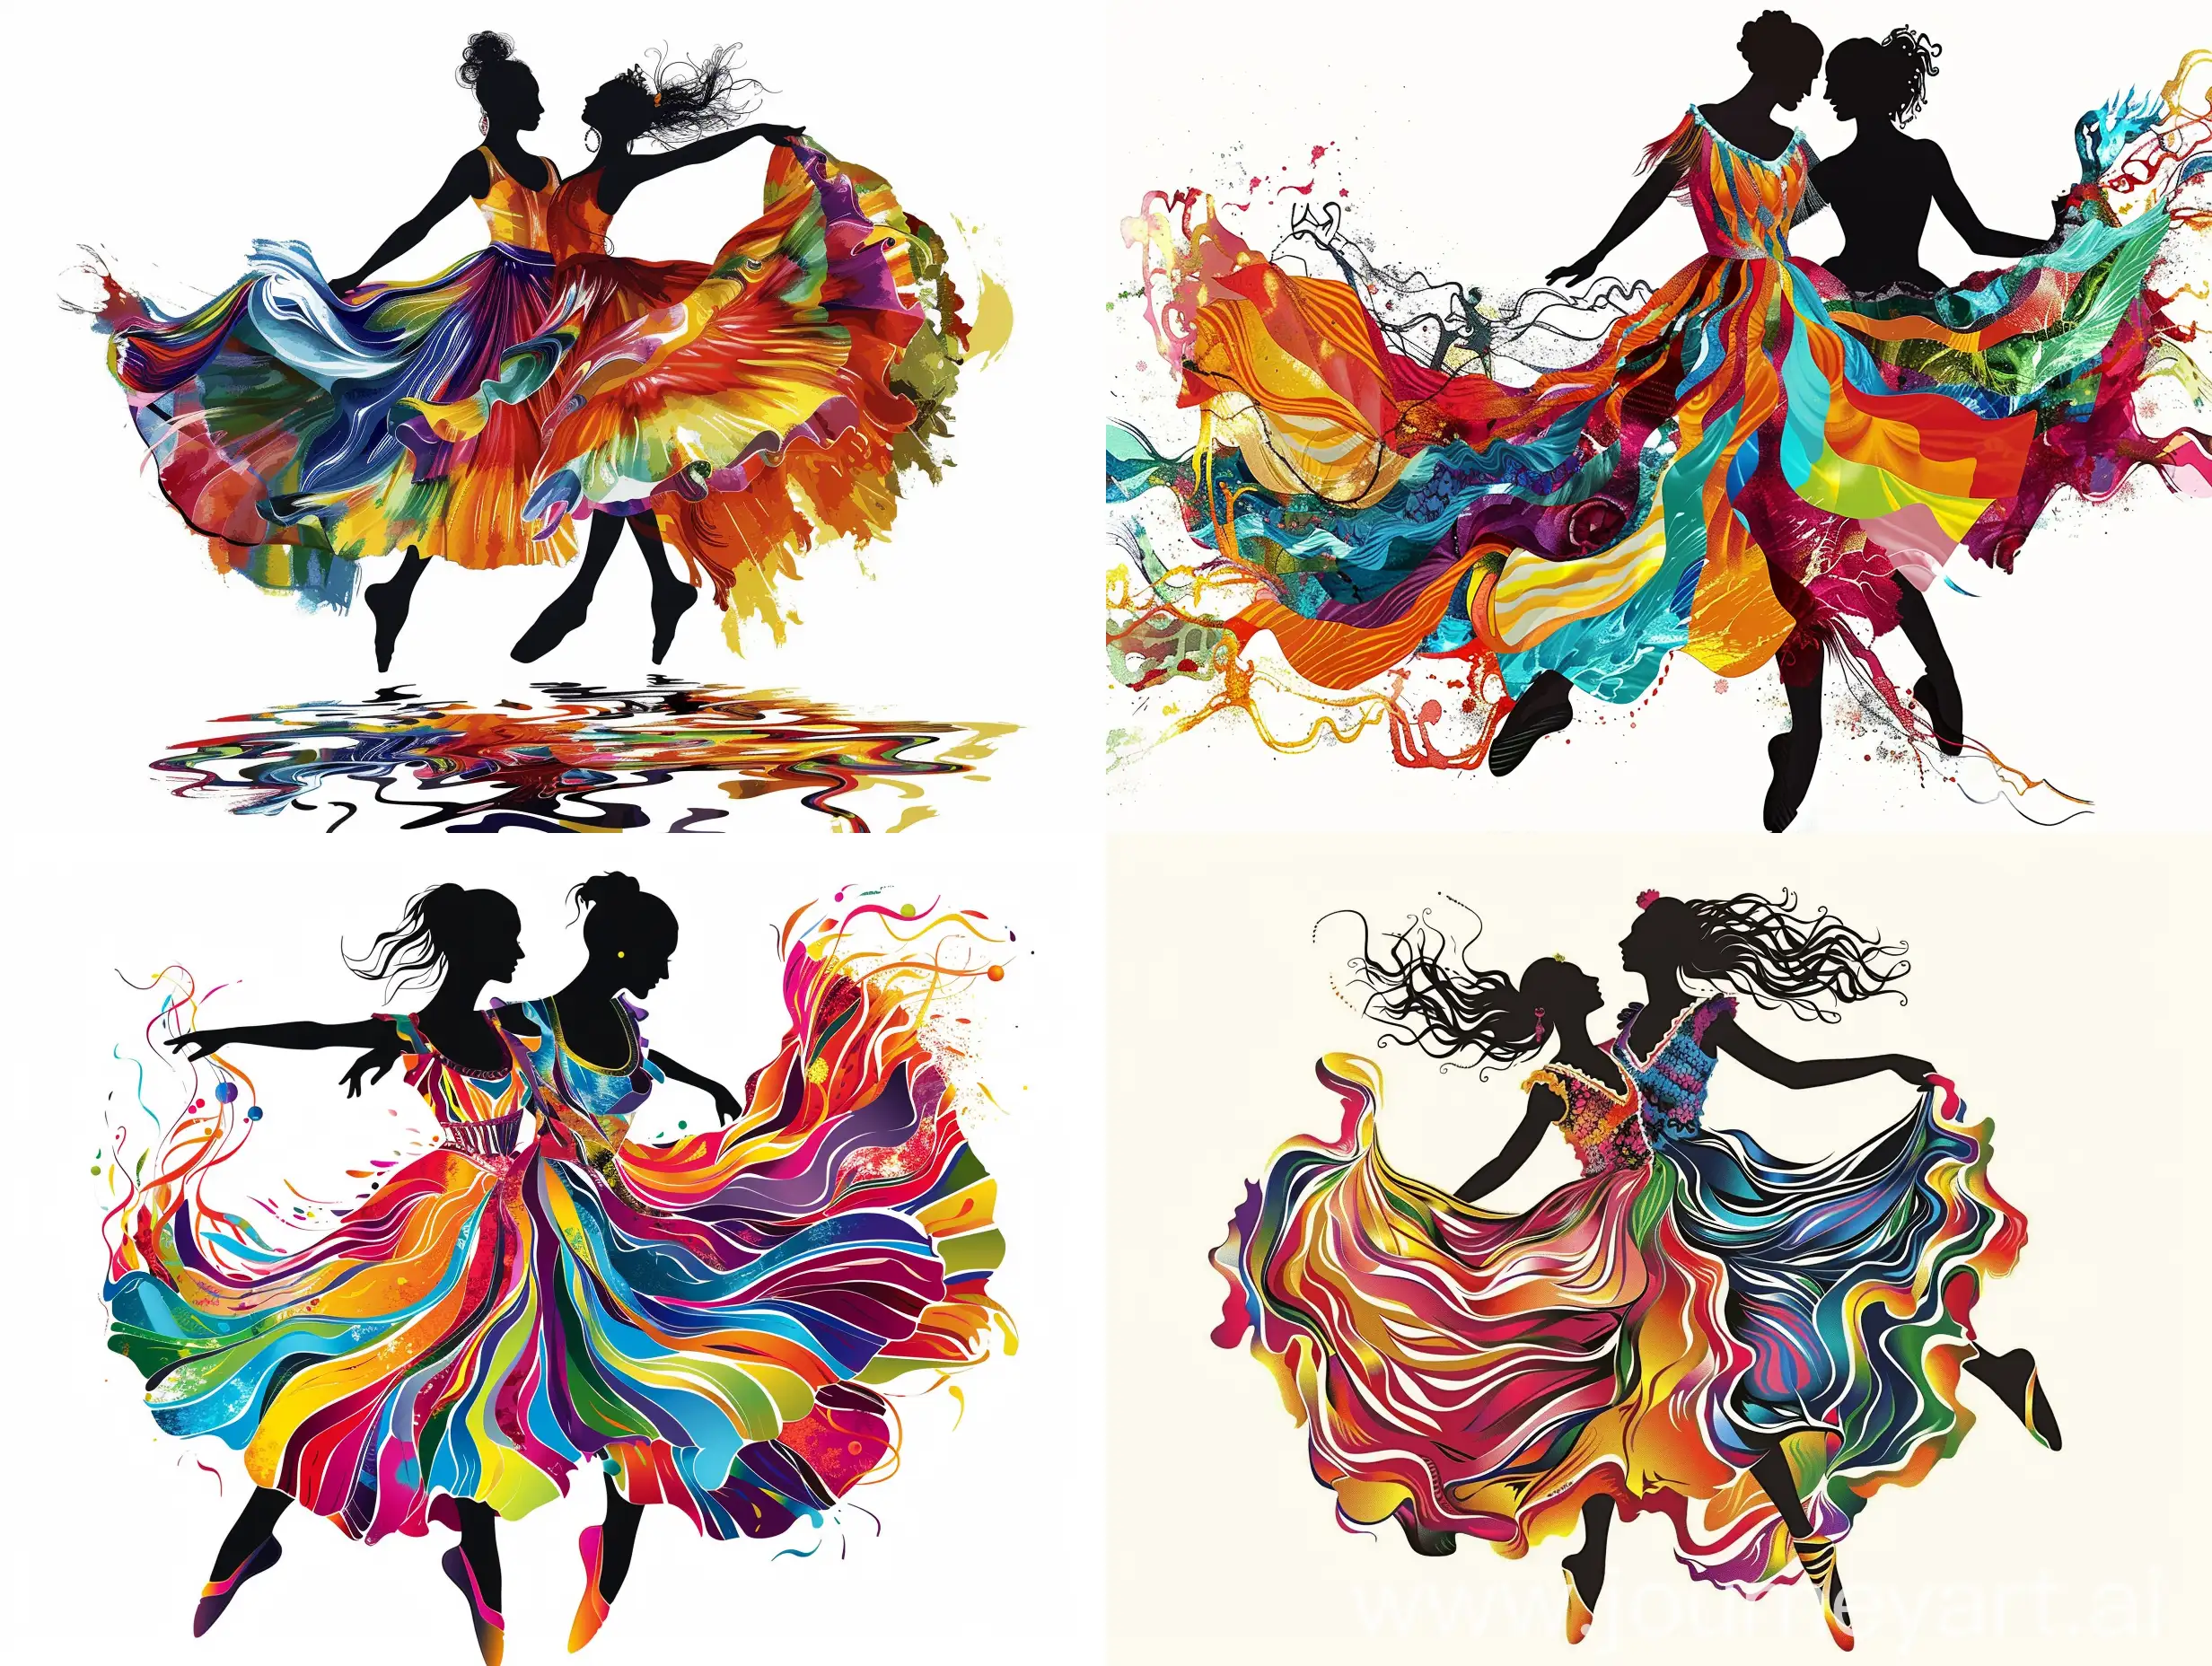 a couple flamenco dancer in dynamic pose, wearing flowing dress with vibrant colors. The dress appearance of being in motion. with ripples and waves suggesting movement. colorful shoes. the background should be white to highlight the dancer and their dress. the style of the image should be livery and expressive, capturing the energy and grace of the dance. the dancer should have their hair styled up away from their face, dancer faces and skin are silhouette black 